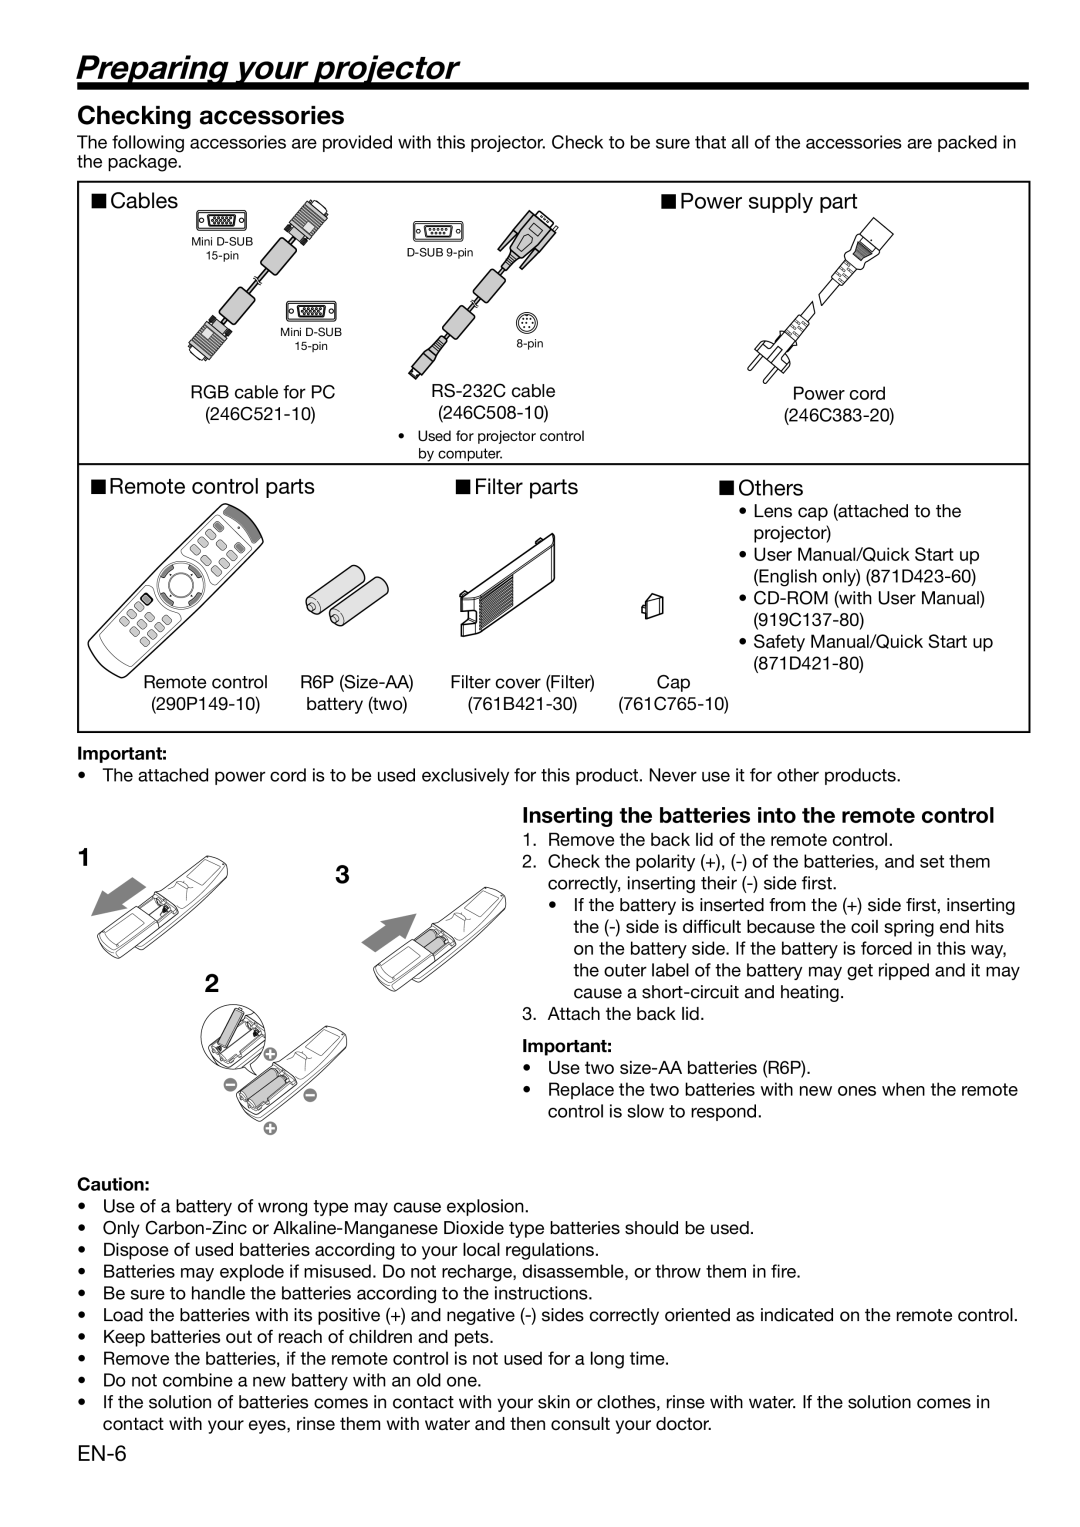 Mitsubishi Electronics HC3100 user manual Preparing your projector, Checking accessories 